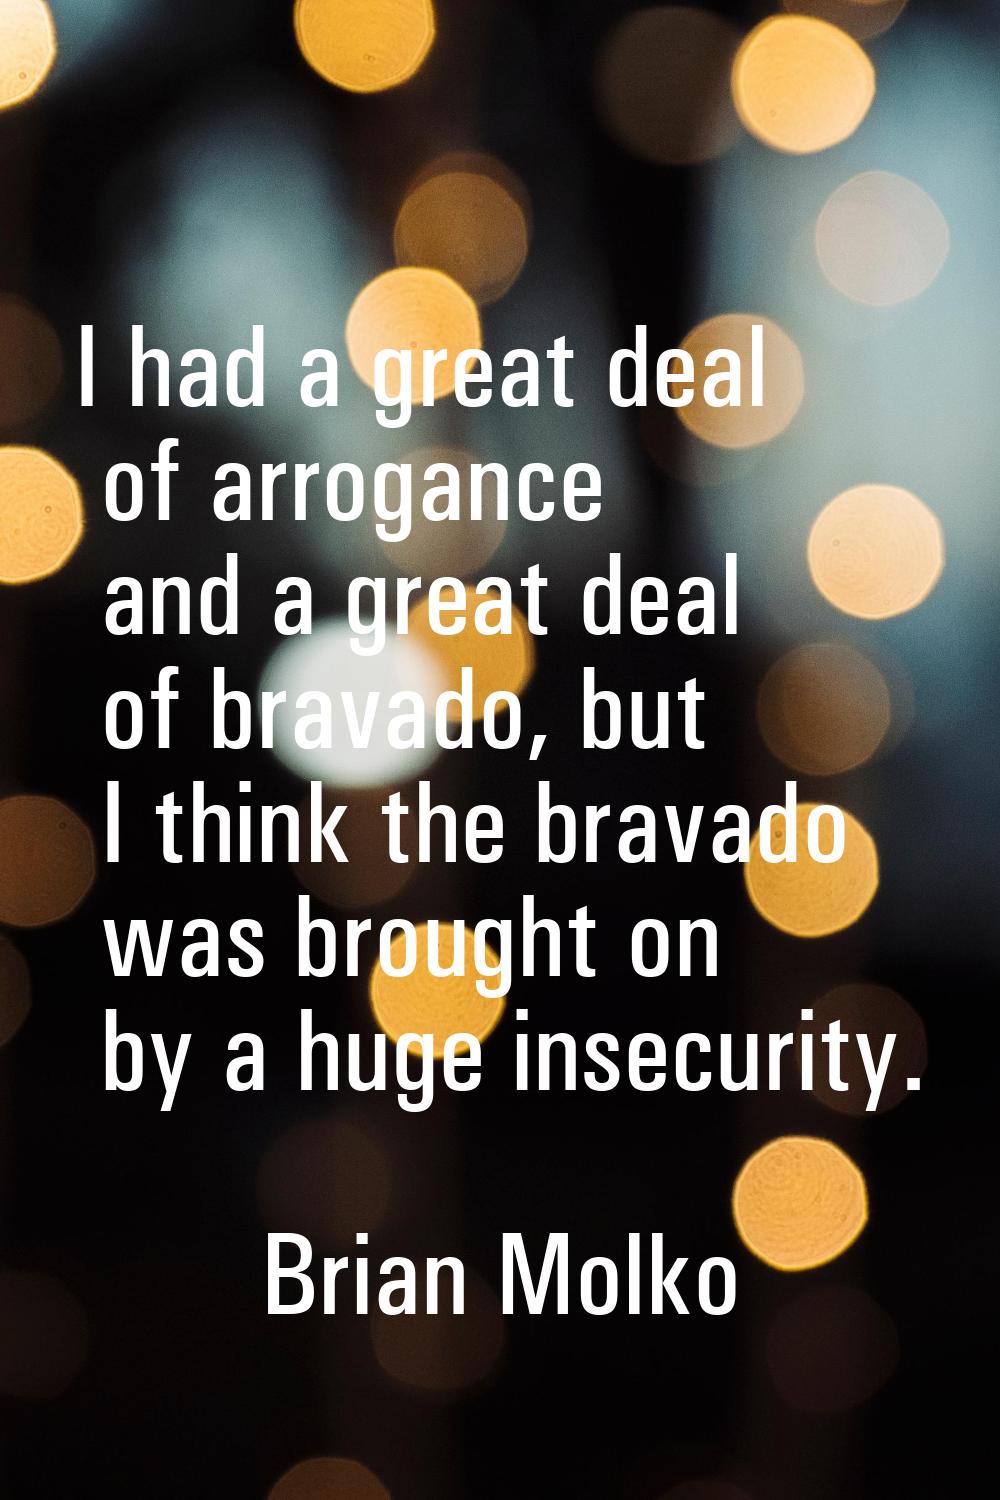 I had a great deal of arrogance and a great deal of bravado, but I think the bravado was brought on